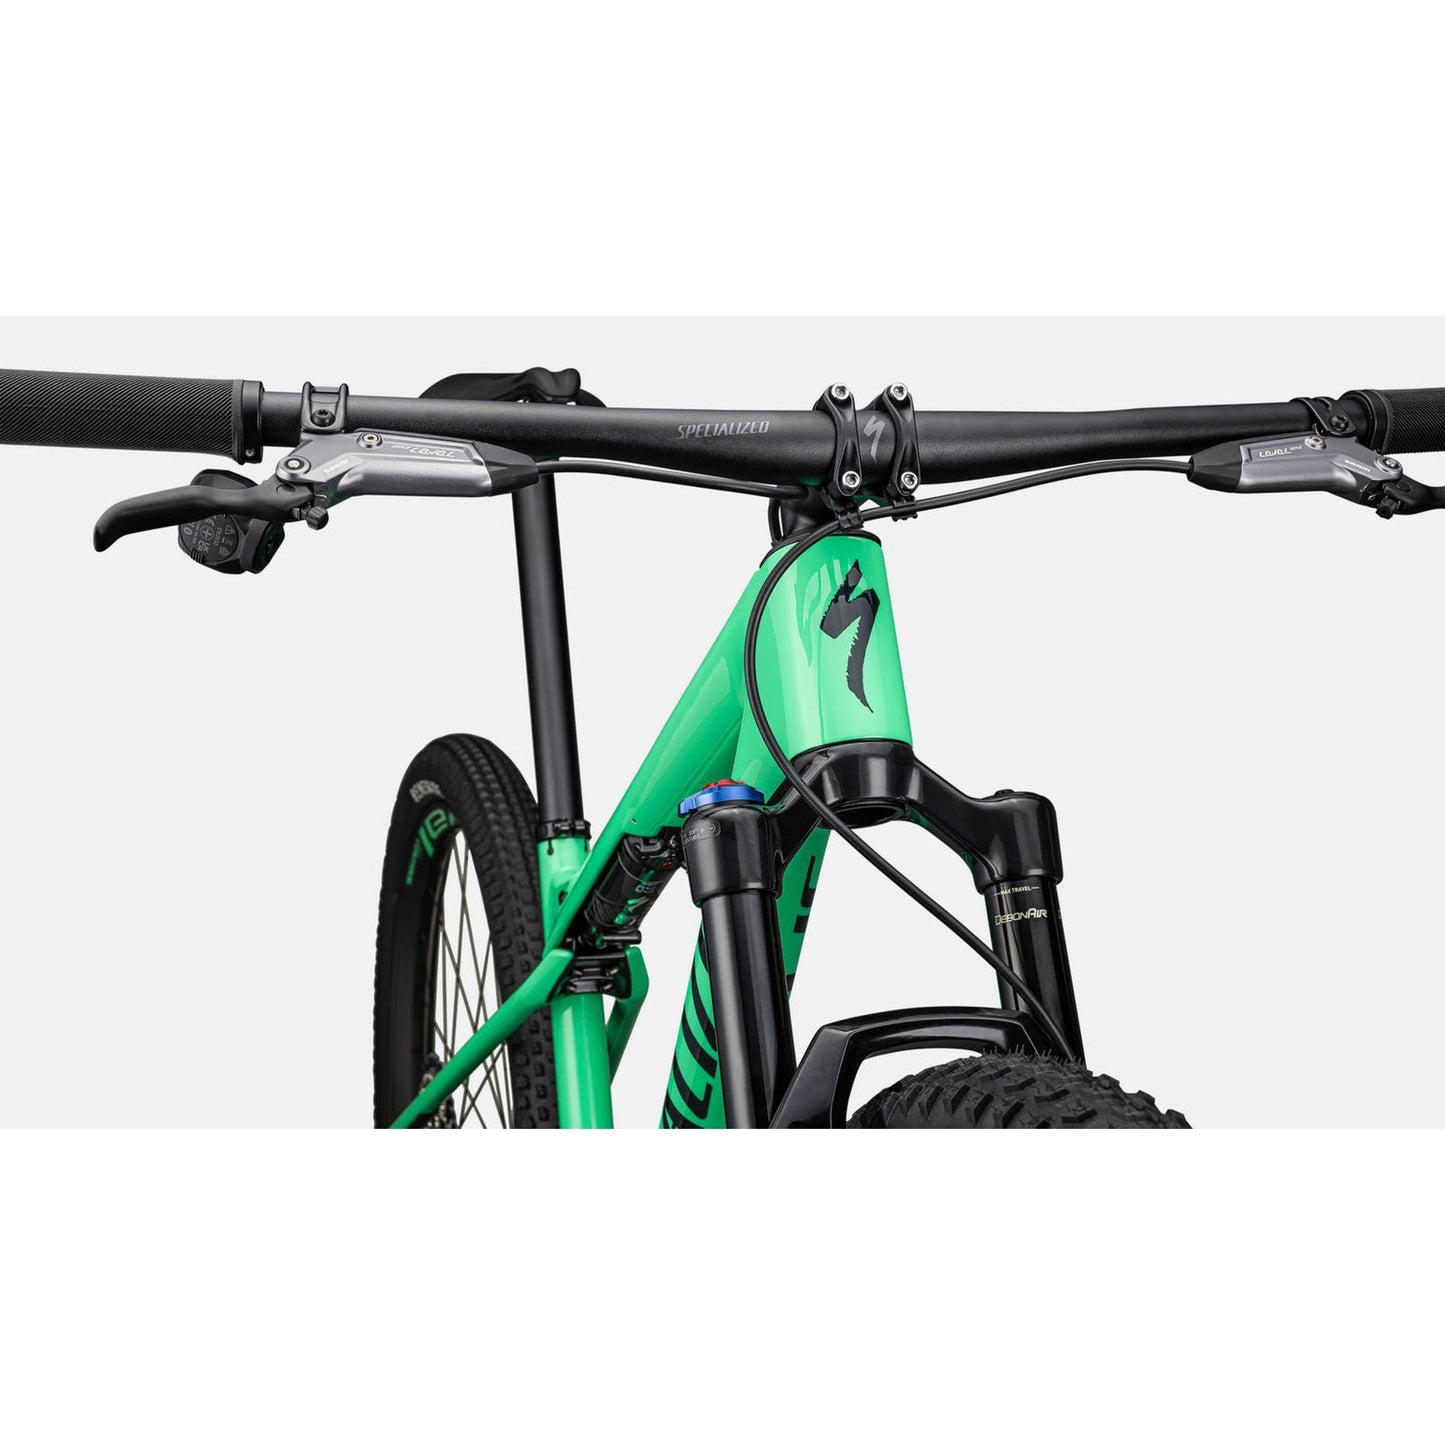 Epic World Cup Expert | Complete Cyclist - THINK FASTEST: The Epic World Cup is the fastest XC race bike in the world on smooth to moderately technical courses thanks to its unmatched combination of efficiency, control, and light-weight.